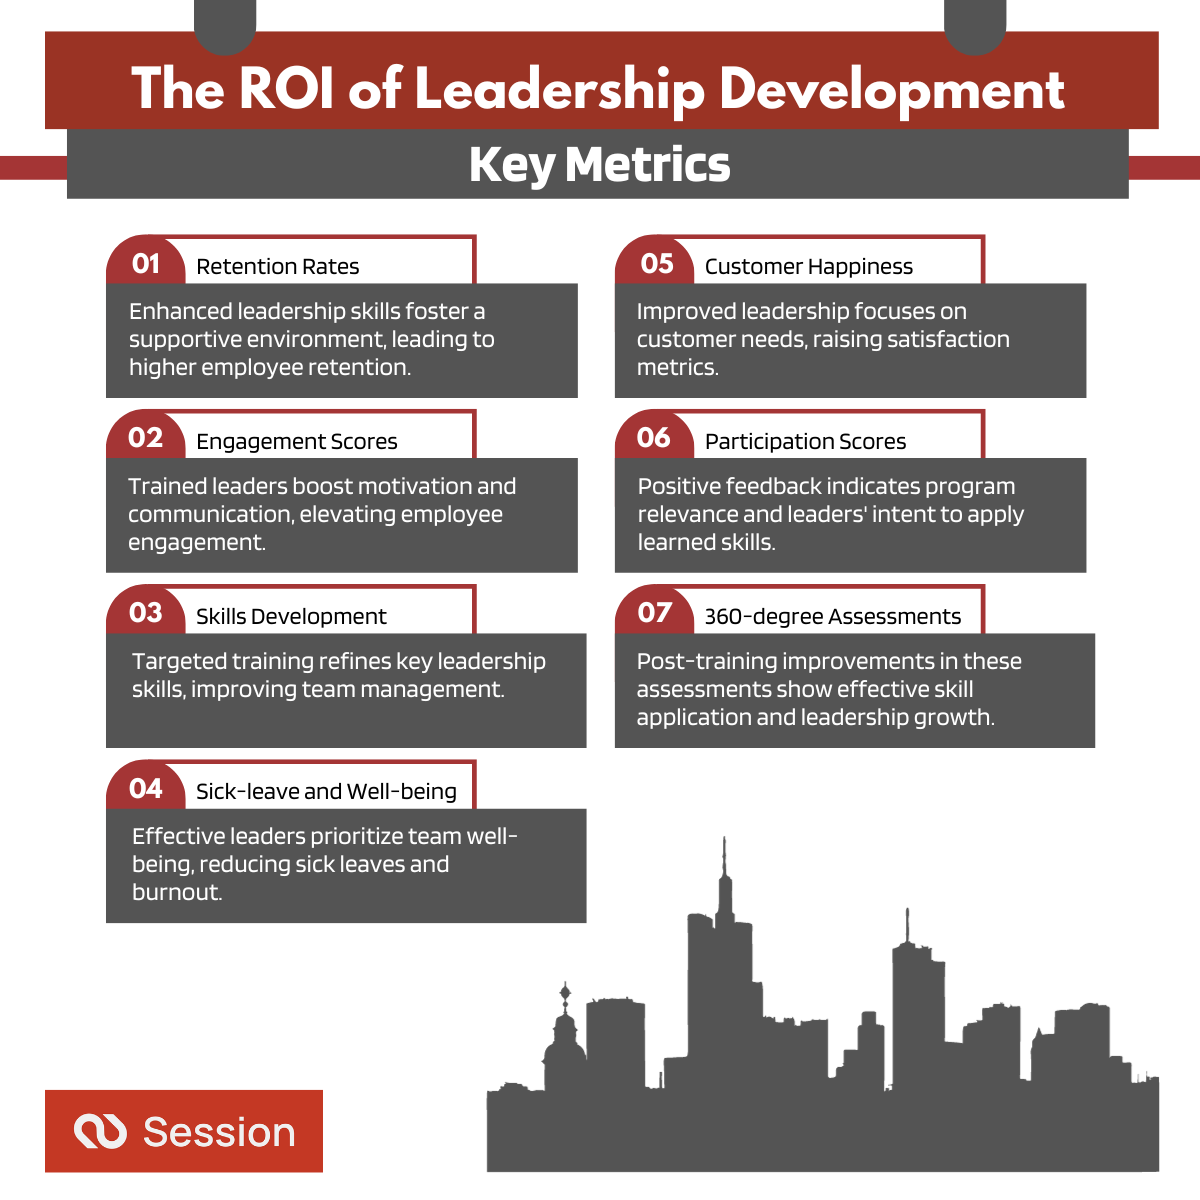 Illustration of the ROI of Leadership Development from Retention Rates over Engagement Scores to 360-degree Assessments.